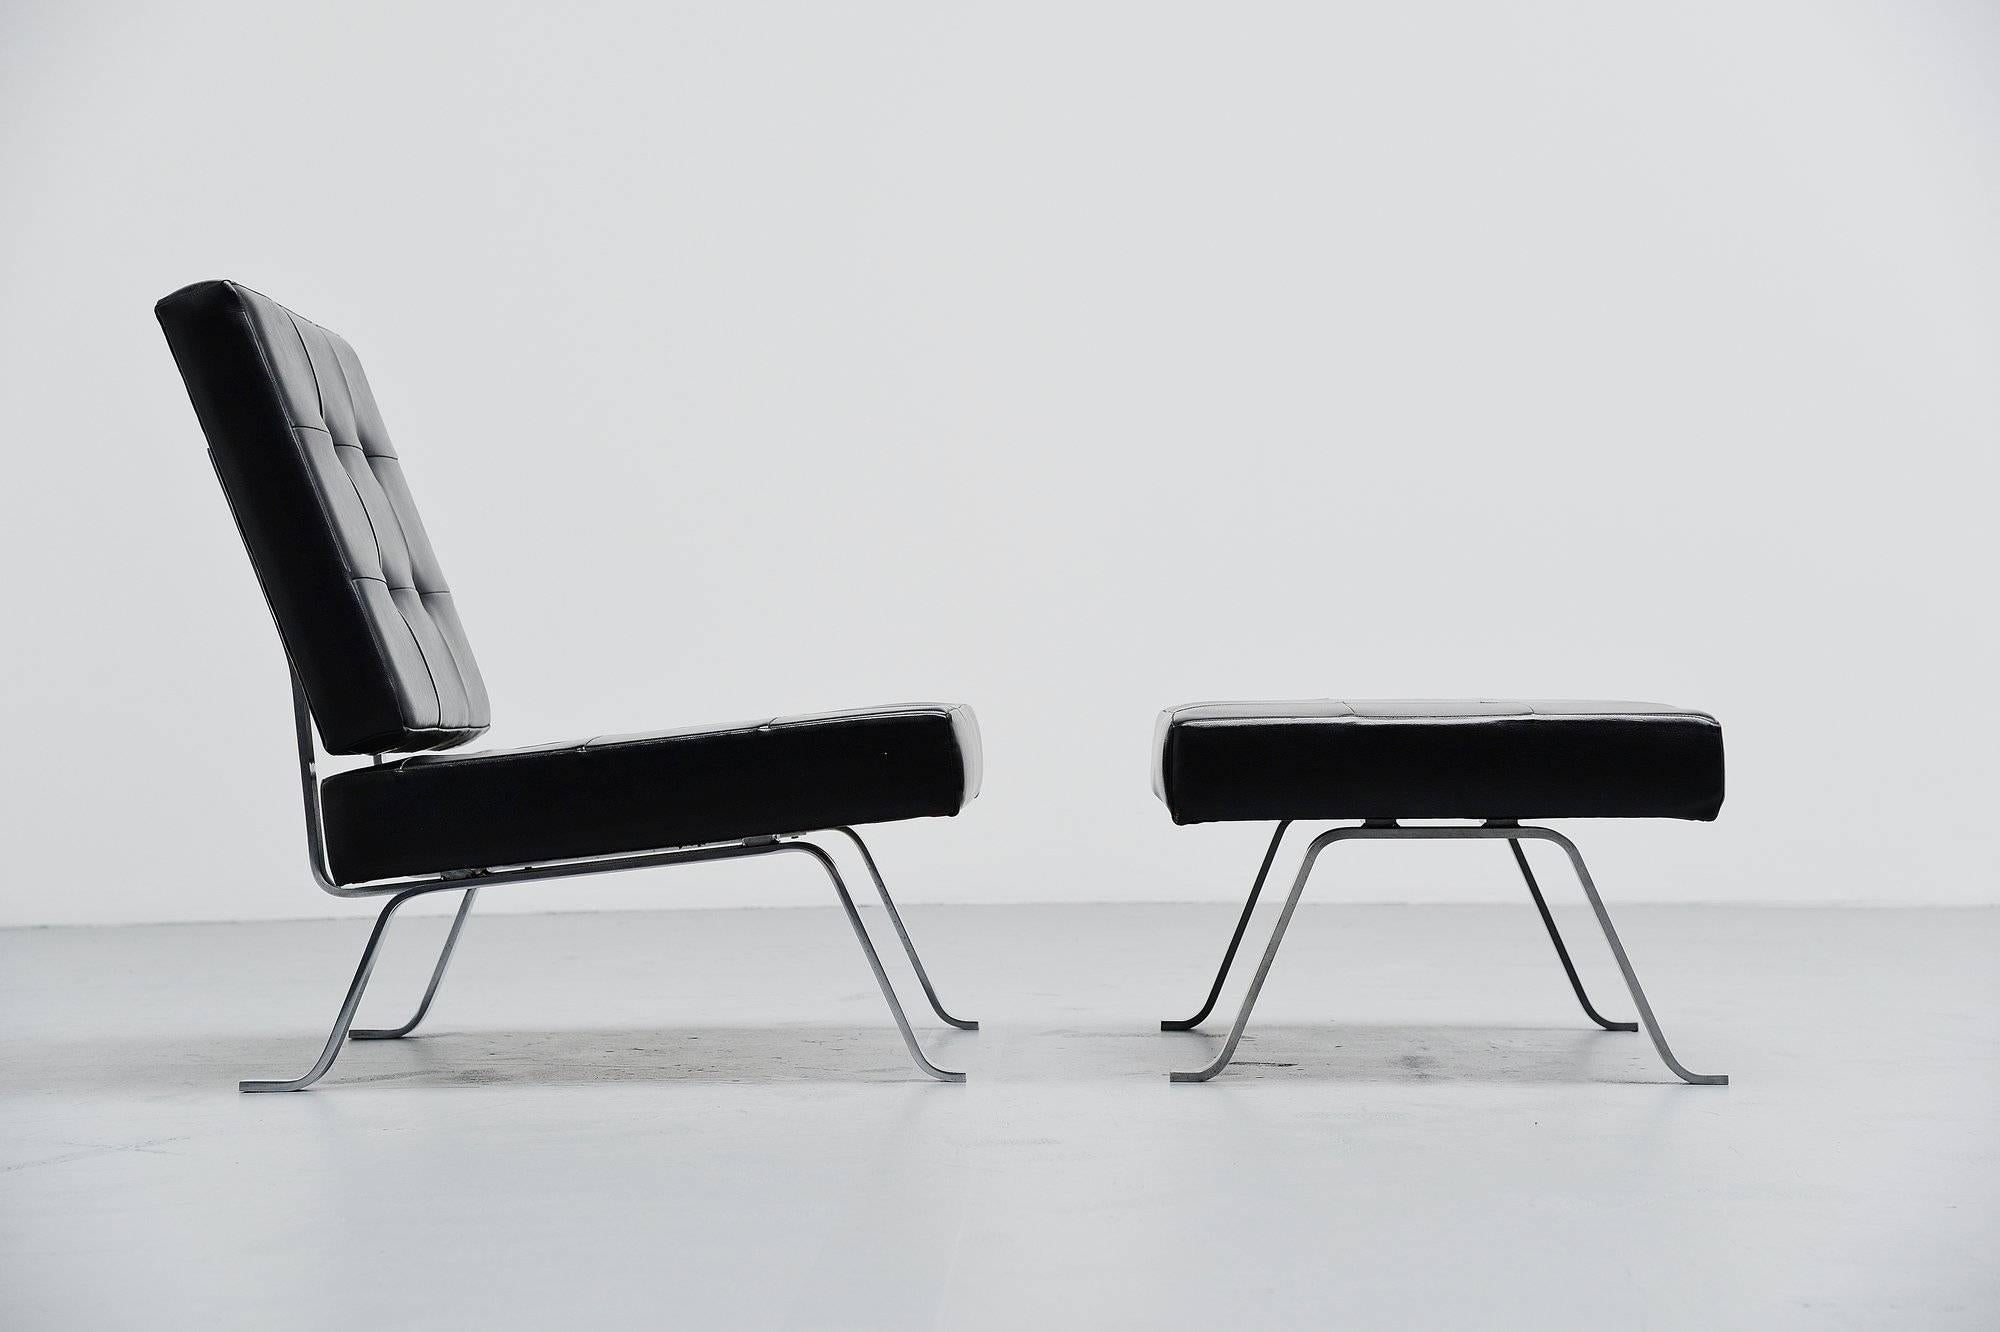 Very nice lounge chair model AP60 designed by Theo Tempelman for AP Original (Polak), Holland,1960. This lounge chair set has solid brushed steel legs and black faux leather. This chair is a combination of the Barcelona chair by Ludwig Mies van der